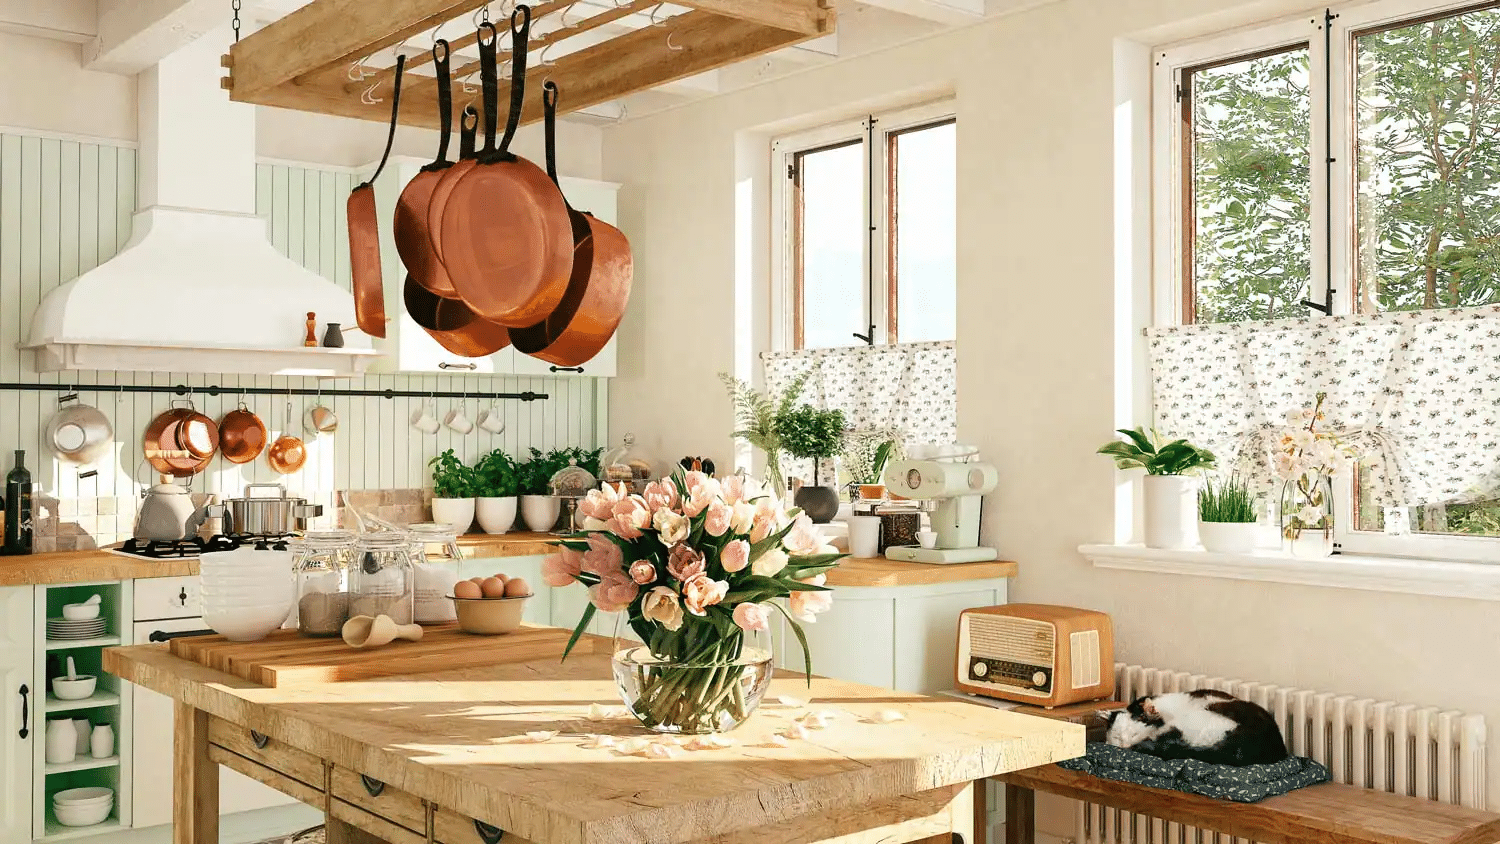  How To Create a Farmhouse Kitchen on a Budget?